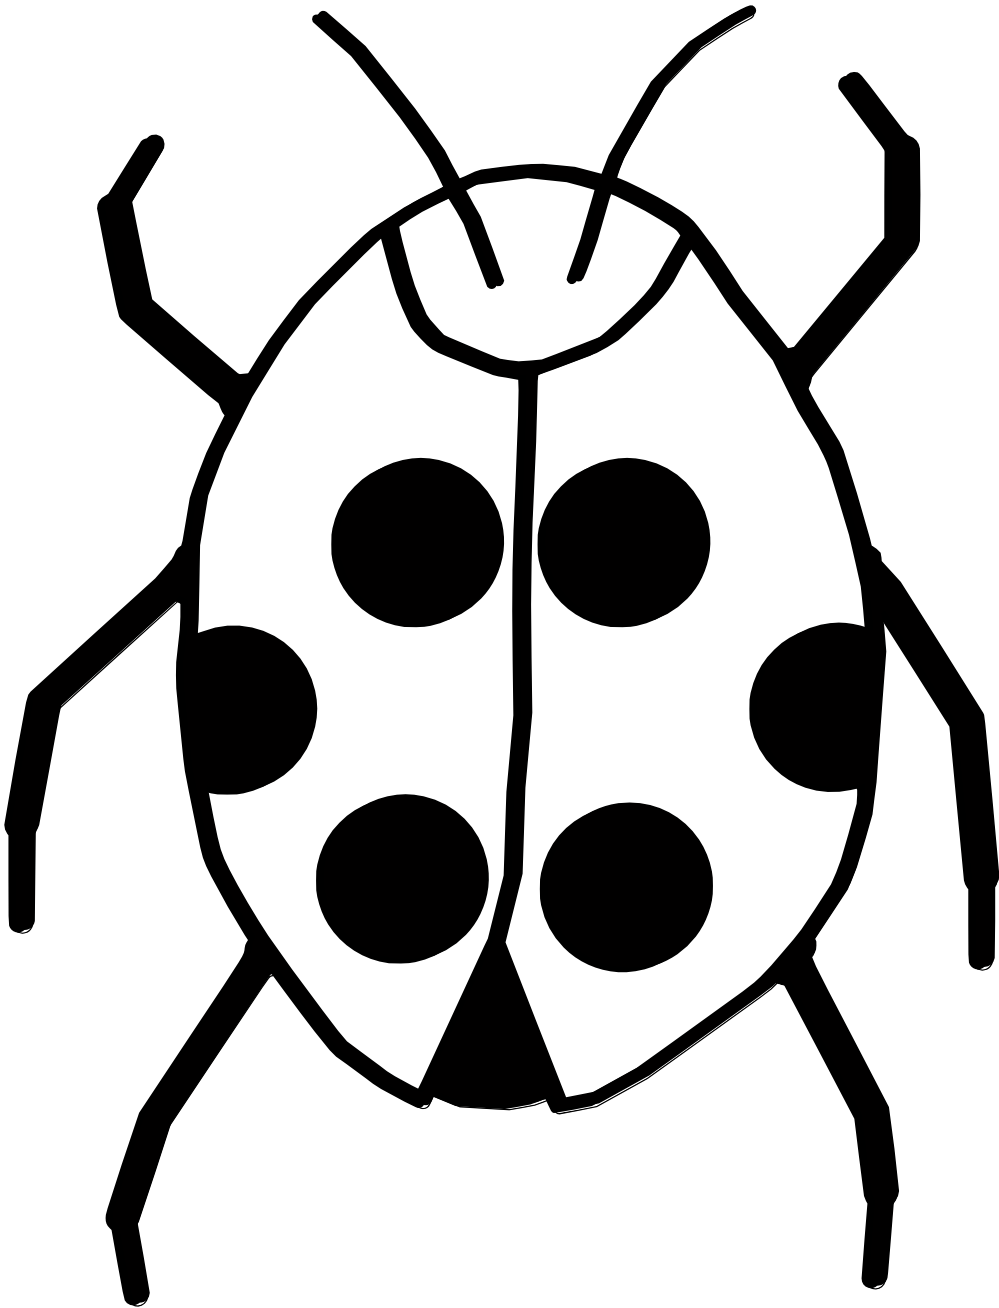 Ladybug Clipart Black And White   Clipart Panda   Free Clipart Images